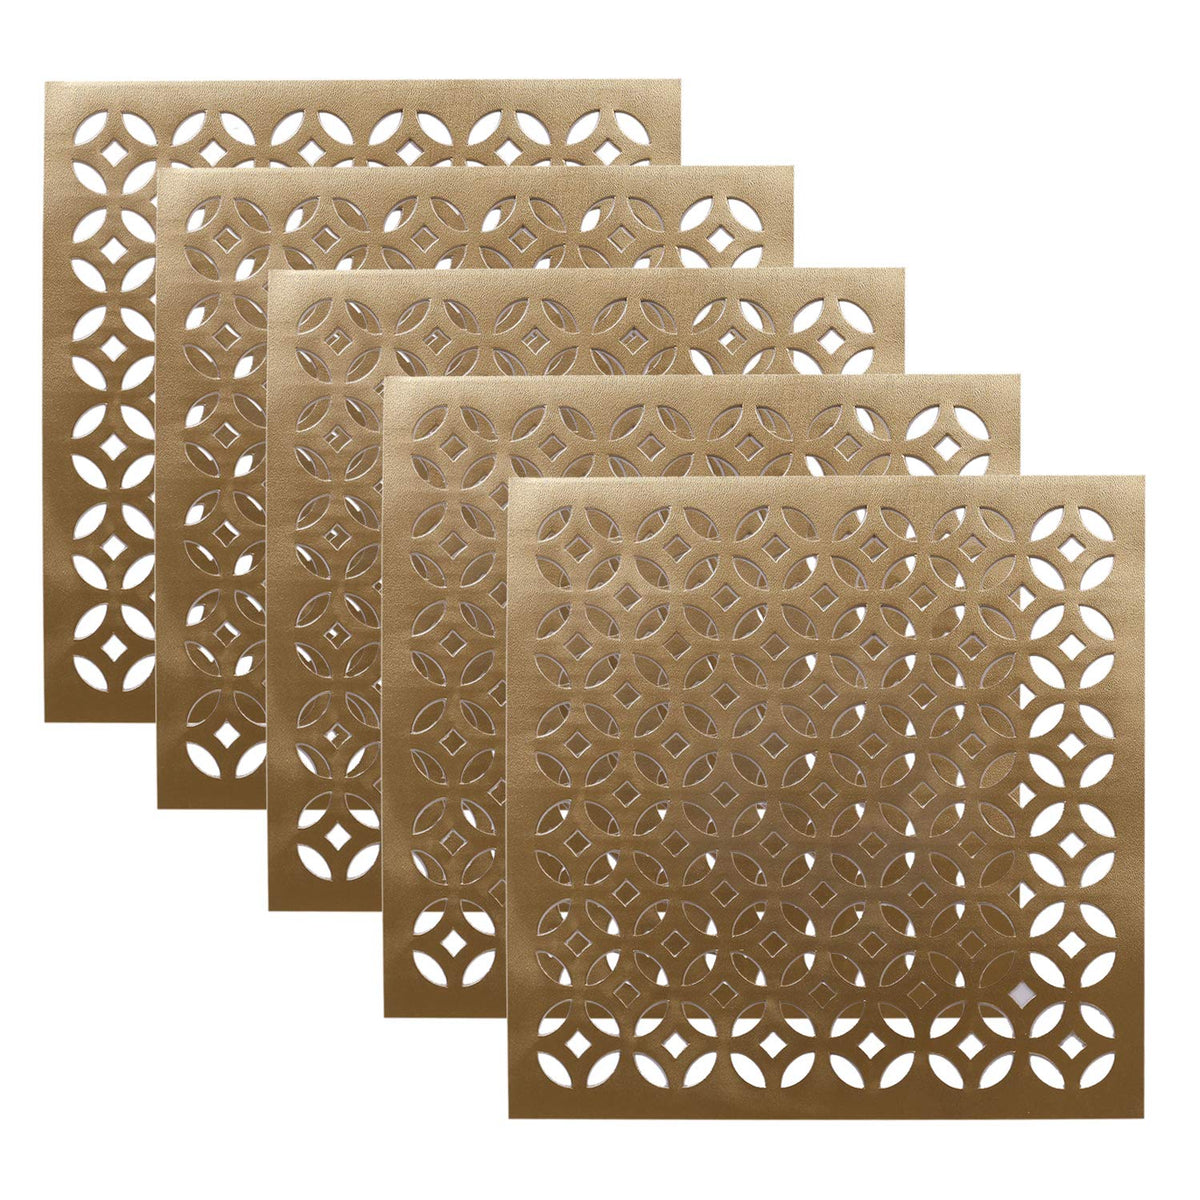 Kuber Industries PVC Soft Leather 6 Pieces Dining Table Placemat Set (Gold, CTKTC029155)